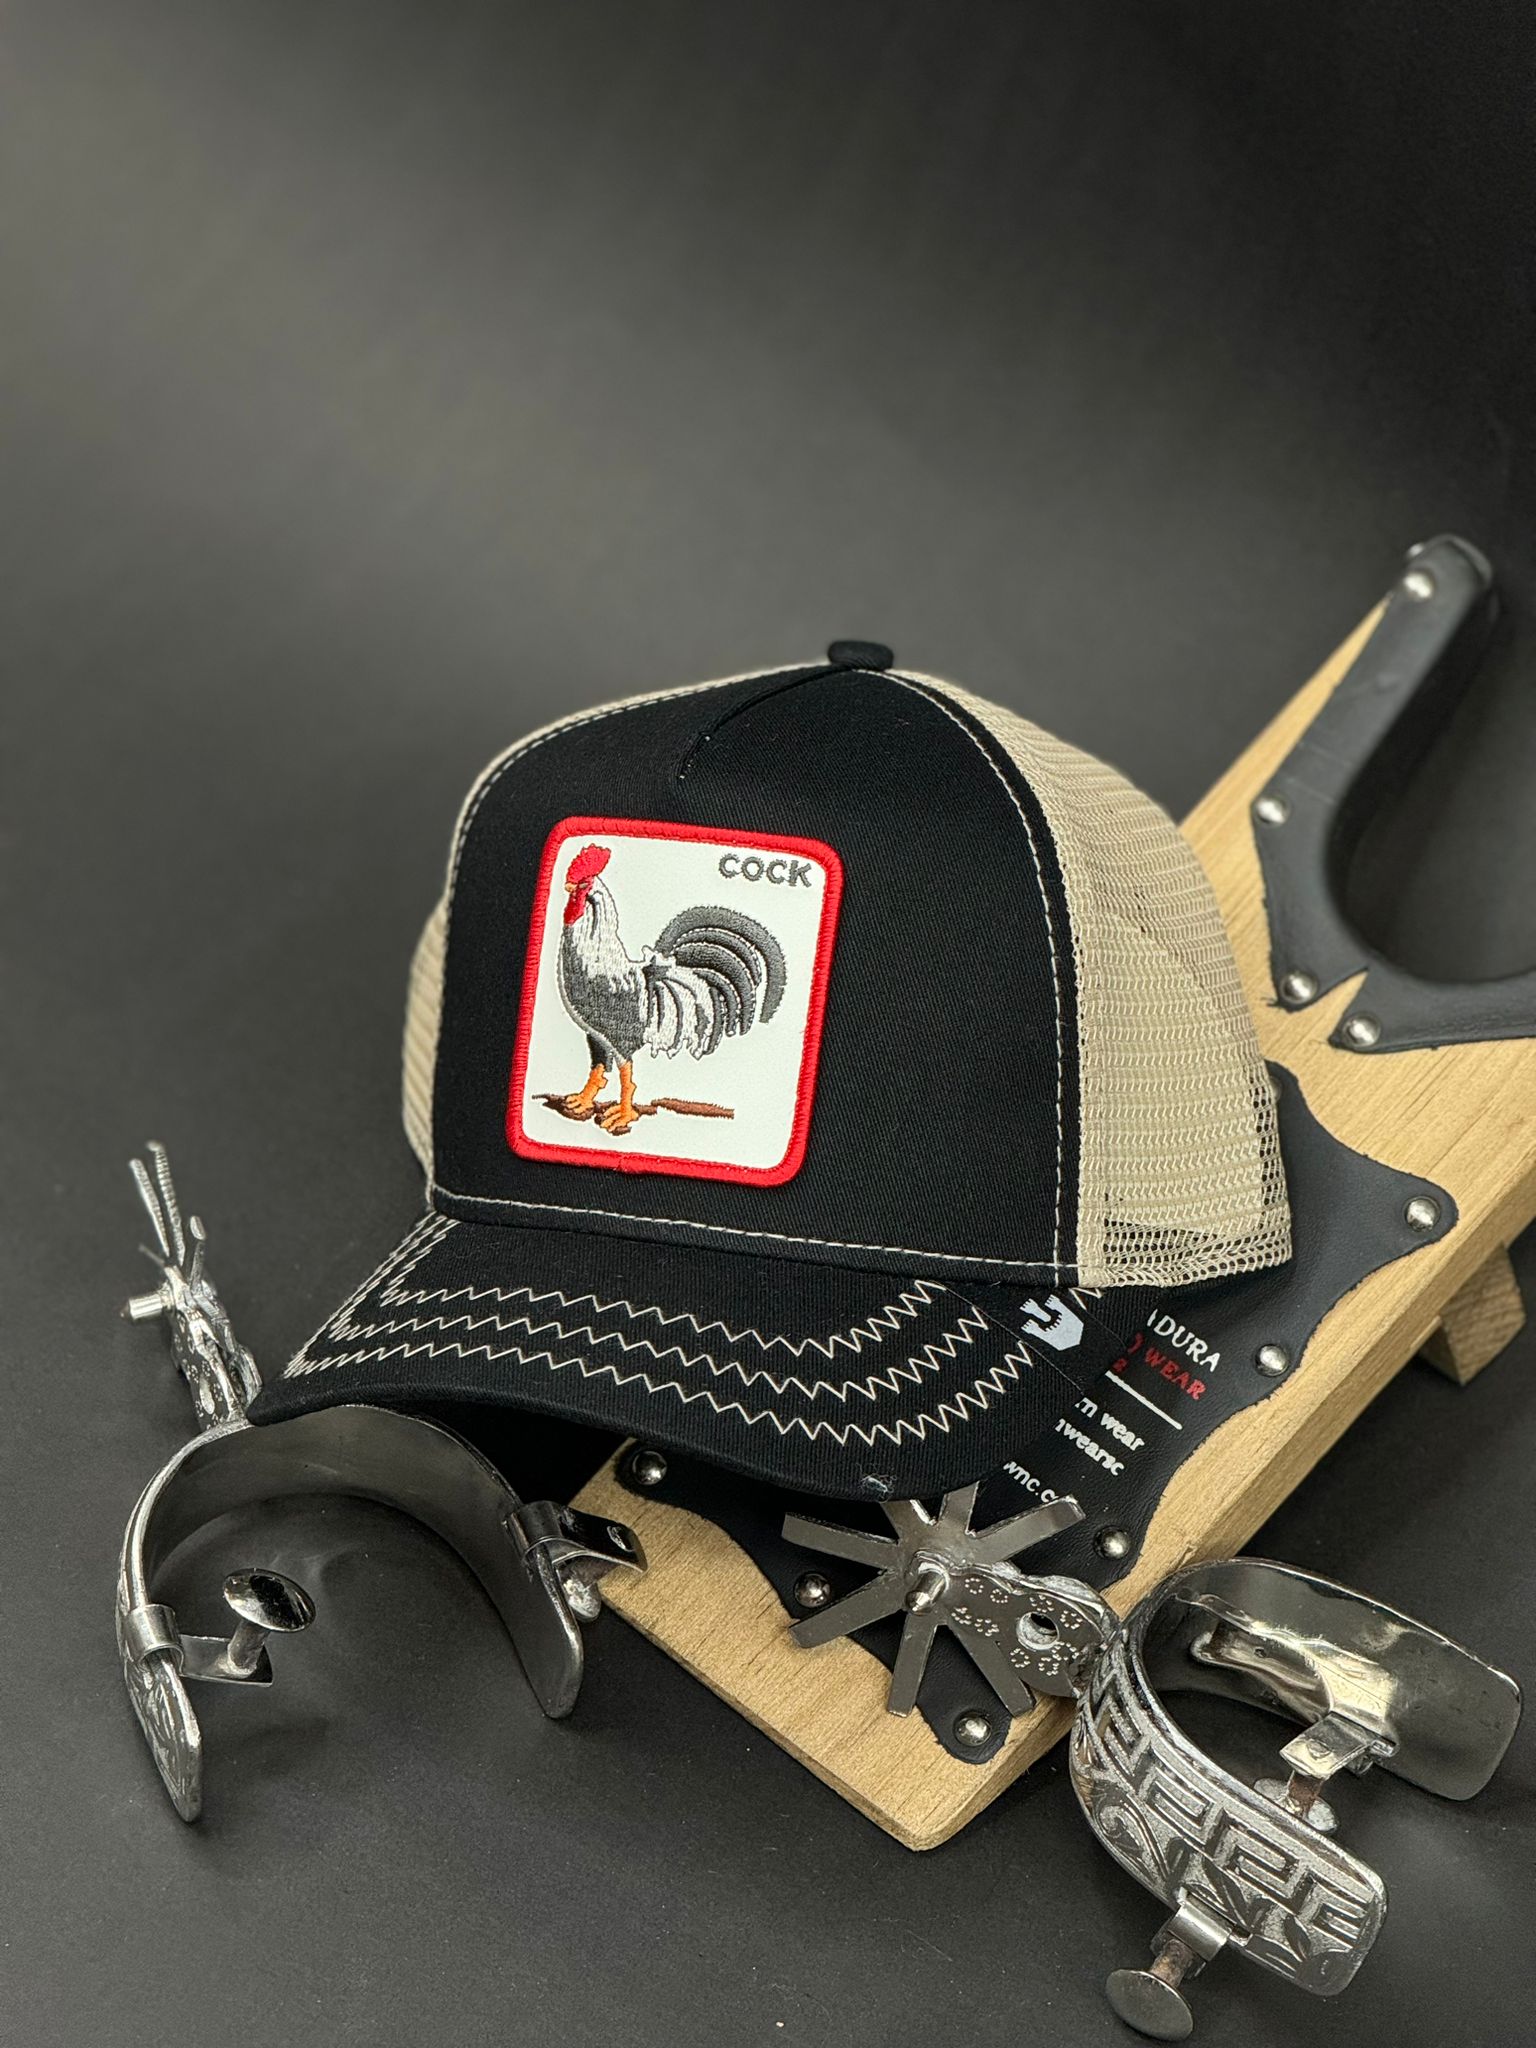 BLACK LINED COCK PATCH CAP